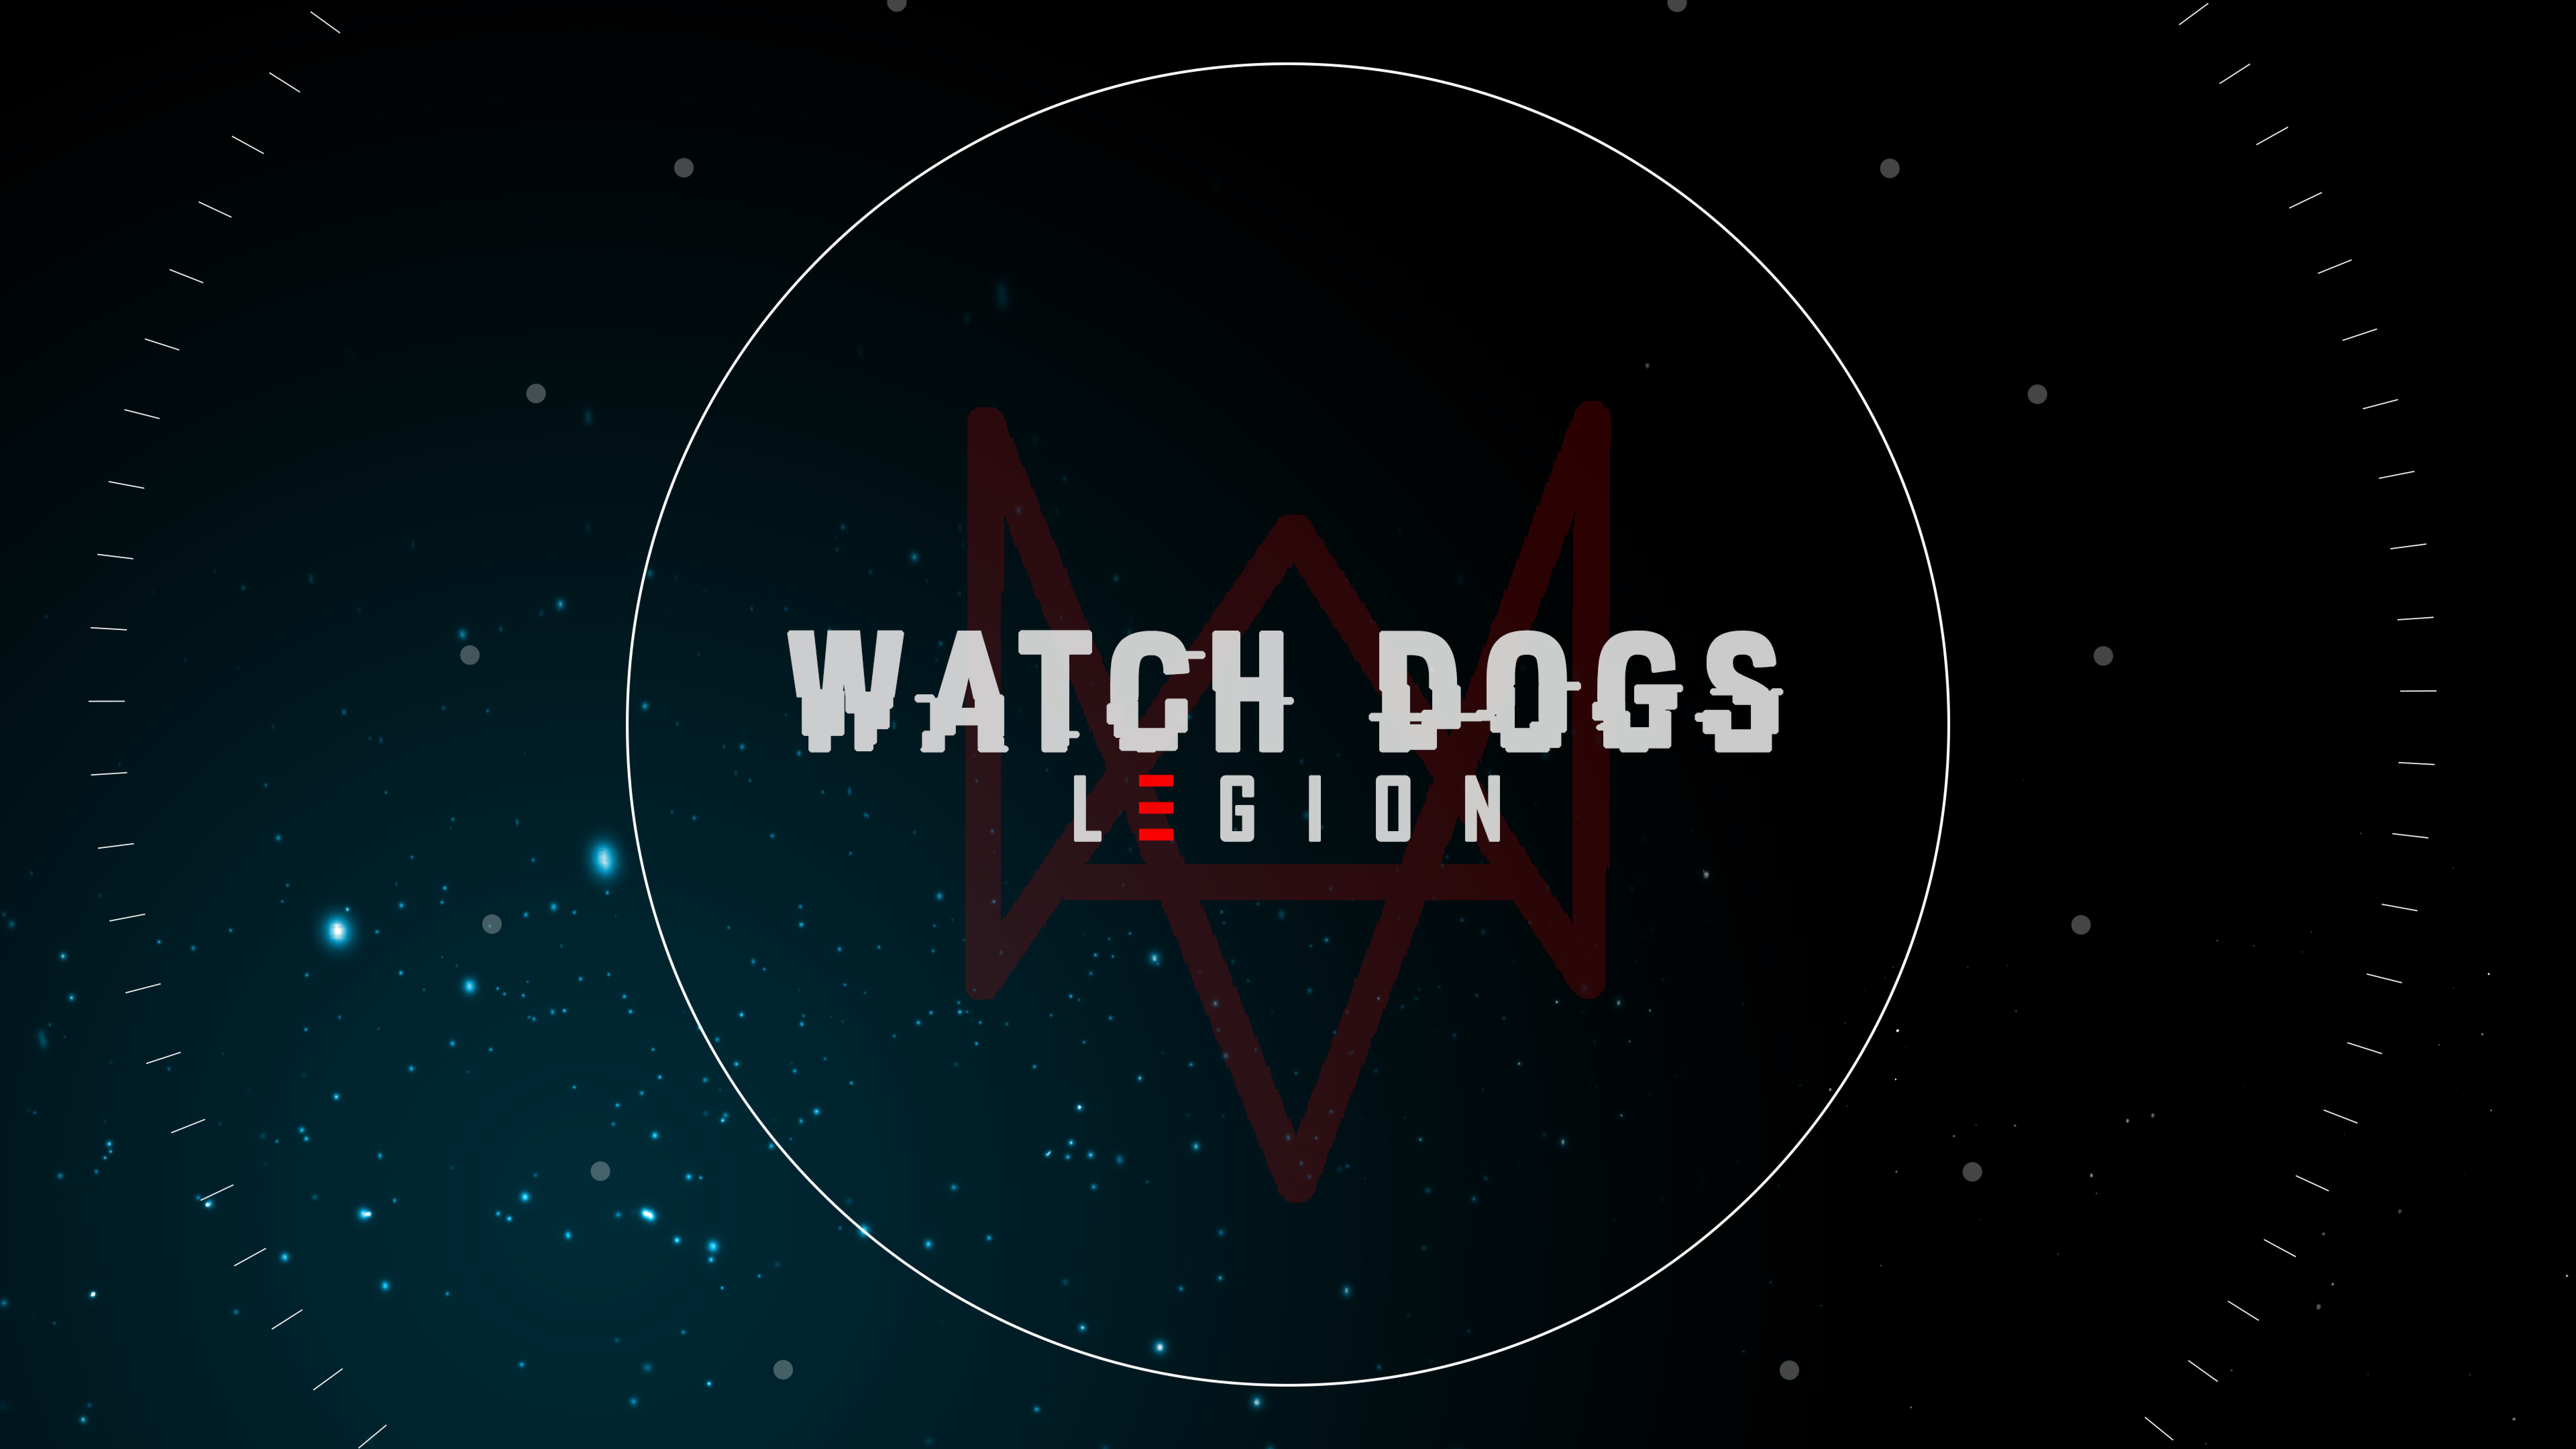 Watch Dogs Legion Logo 8K Wallpaper, HD Games 4K Wallpaper, Image, Photo and Background